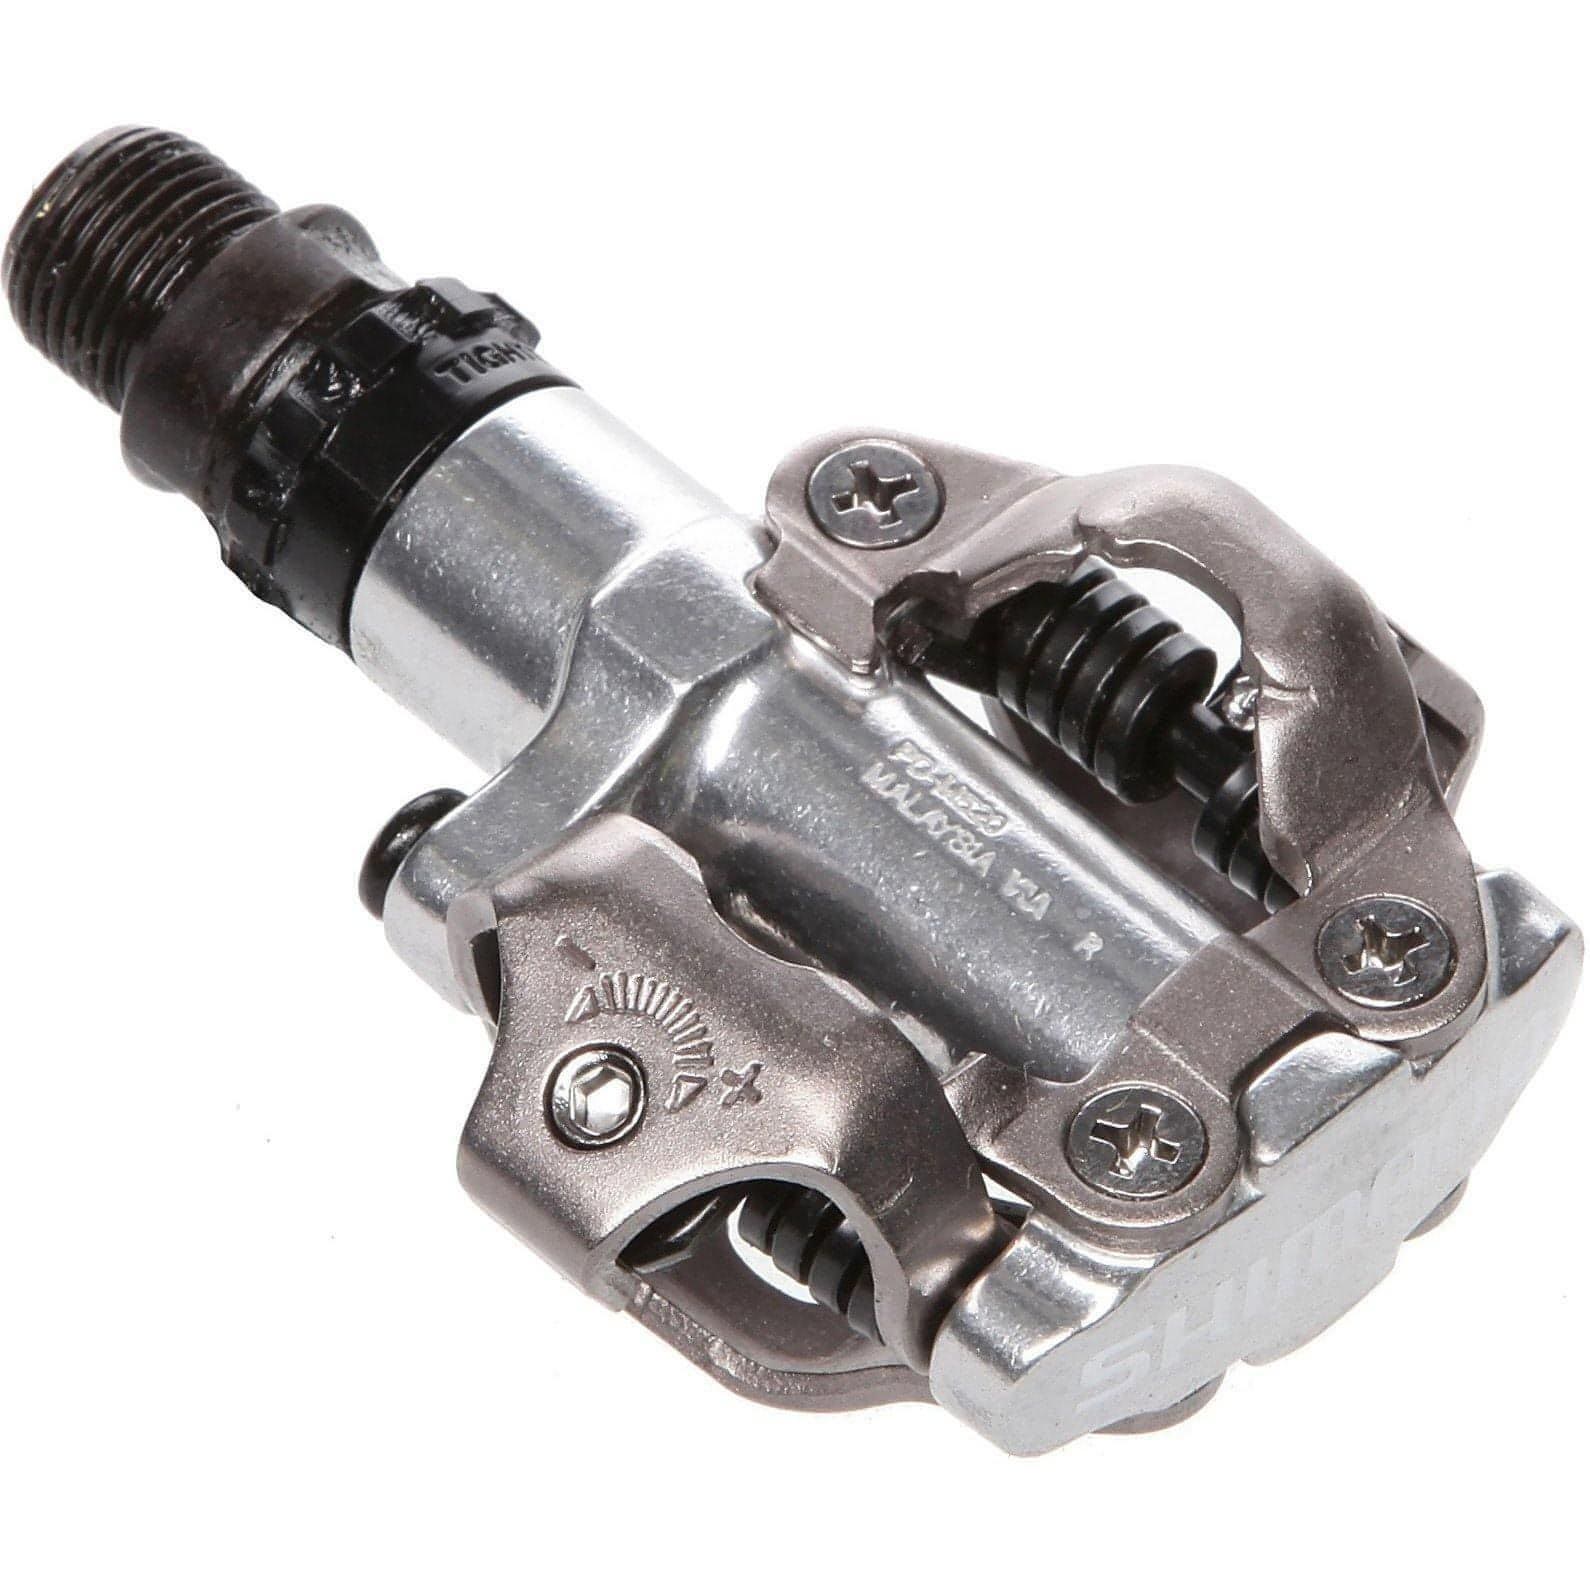 Shimano PD-M520 Pedals - Silver 4524667060468 - Start Fitness